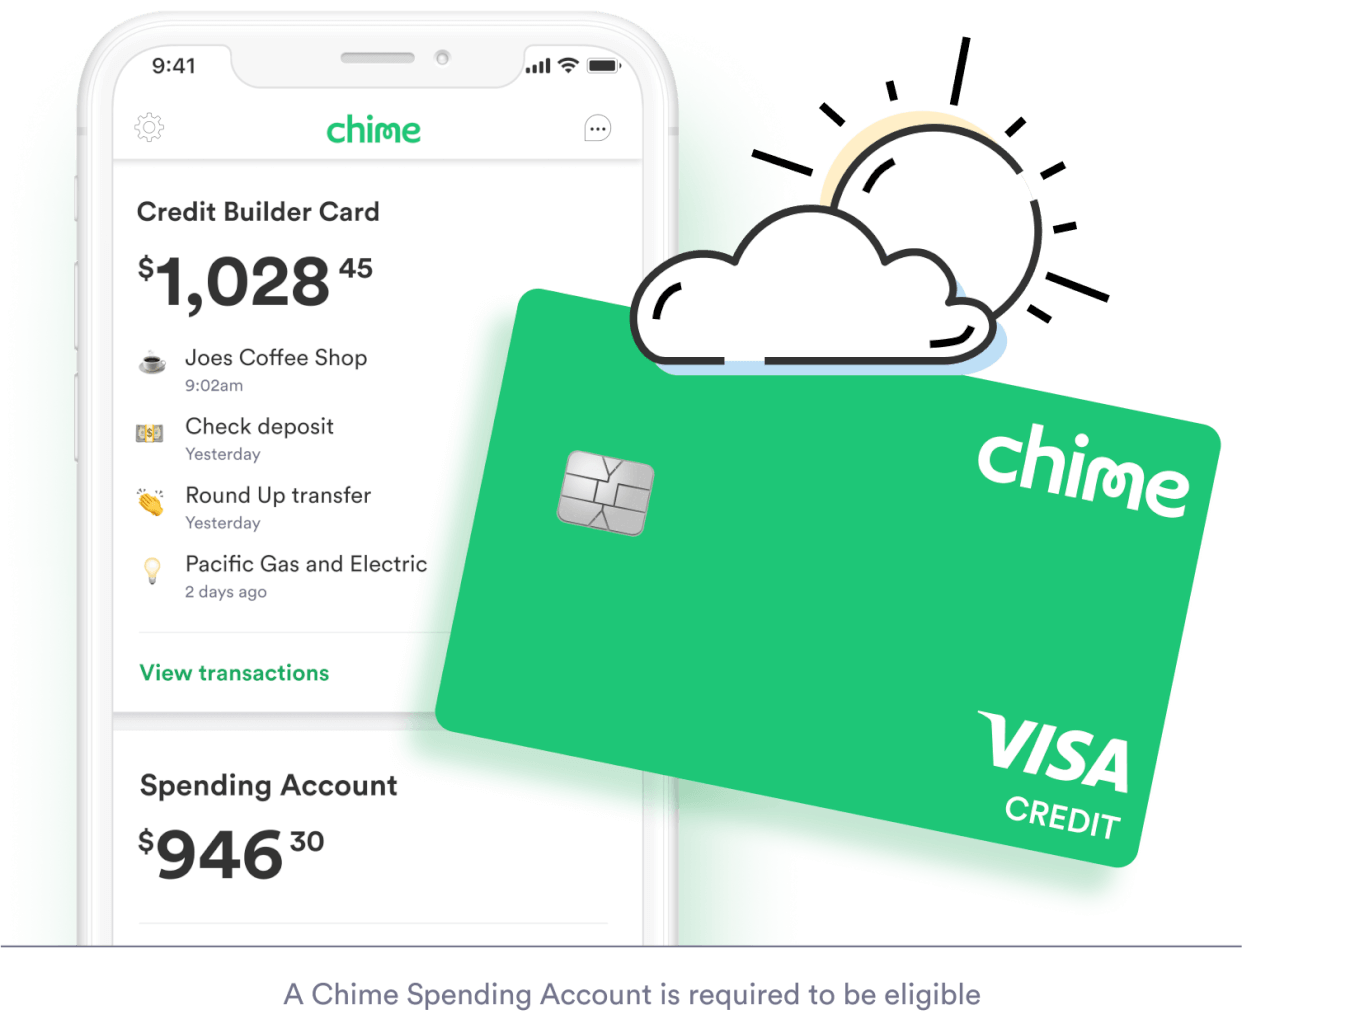 Chime Launches Credit Card That Taps Into Bank Account Funds TheCreditShifu.com